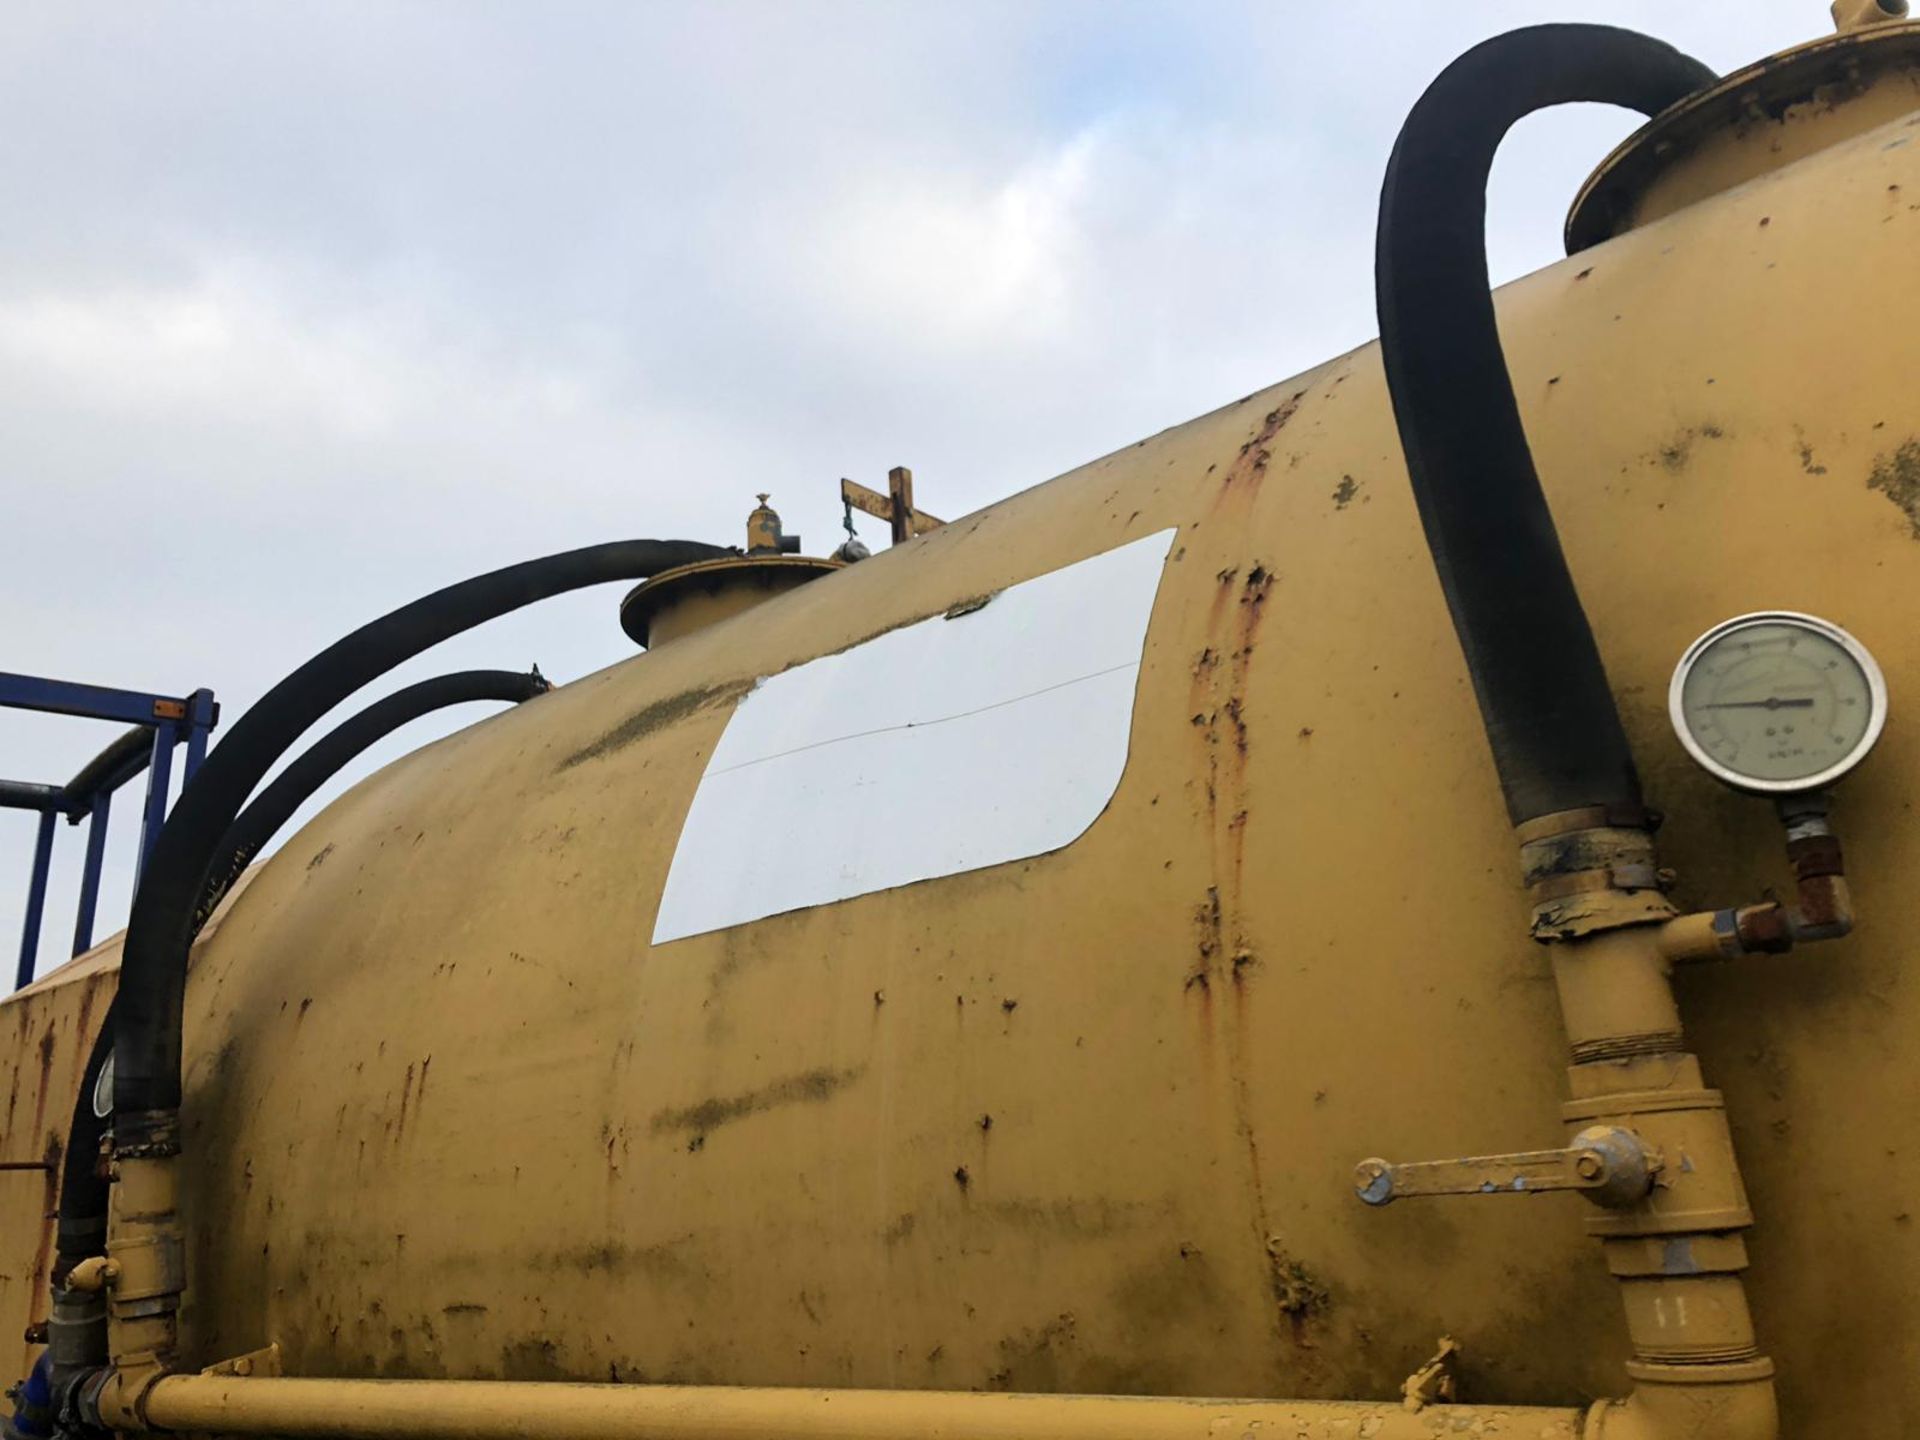 1989 TWIN AXLE TOW ABLE YELLOW OIL TANK, SERIAL NUMBER: VE 355 *PLUS VAT* - Image 6 of 10